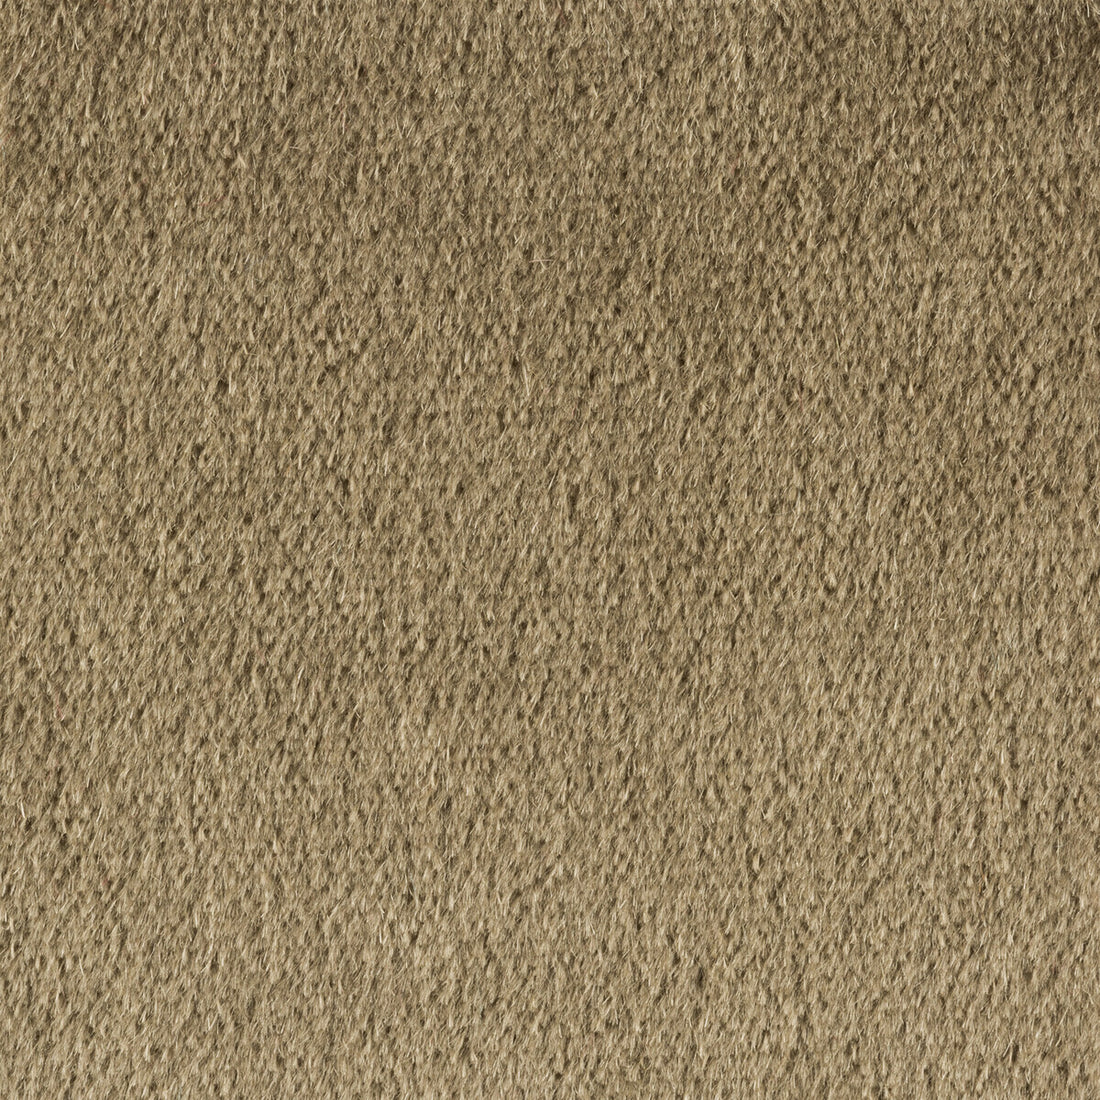 Autun Mohair Velvet fabric in tobacco color - pattern BR-89778.881.0 - by Brunschwig &amp; Fils